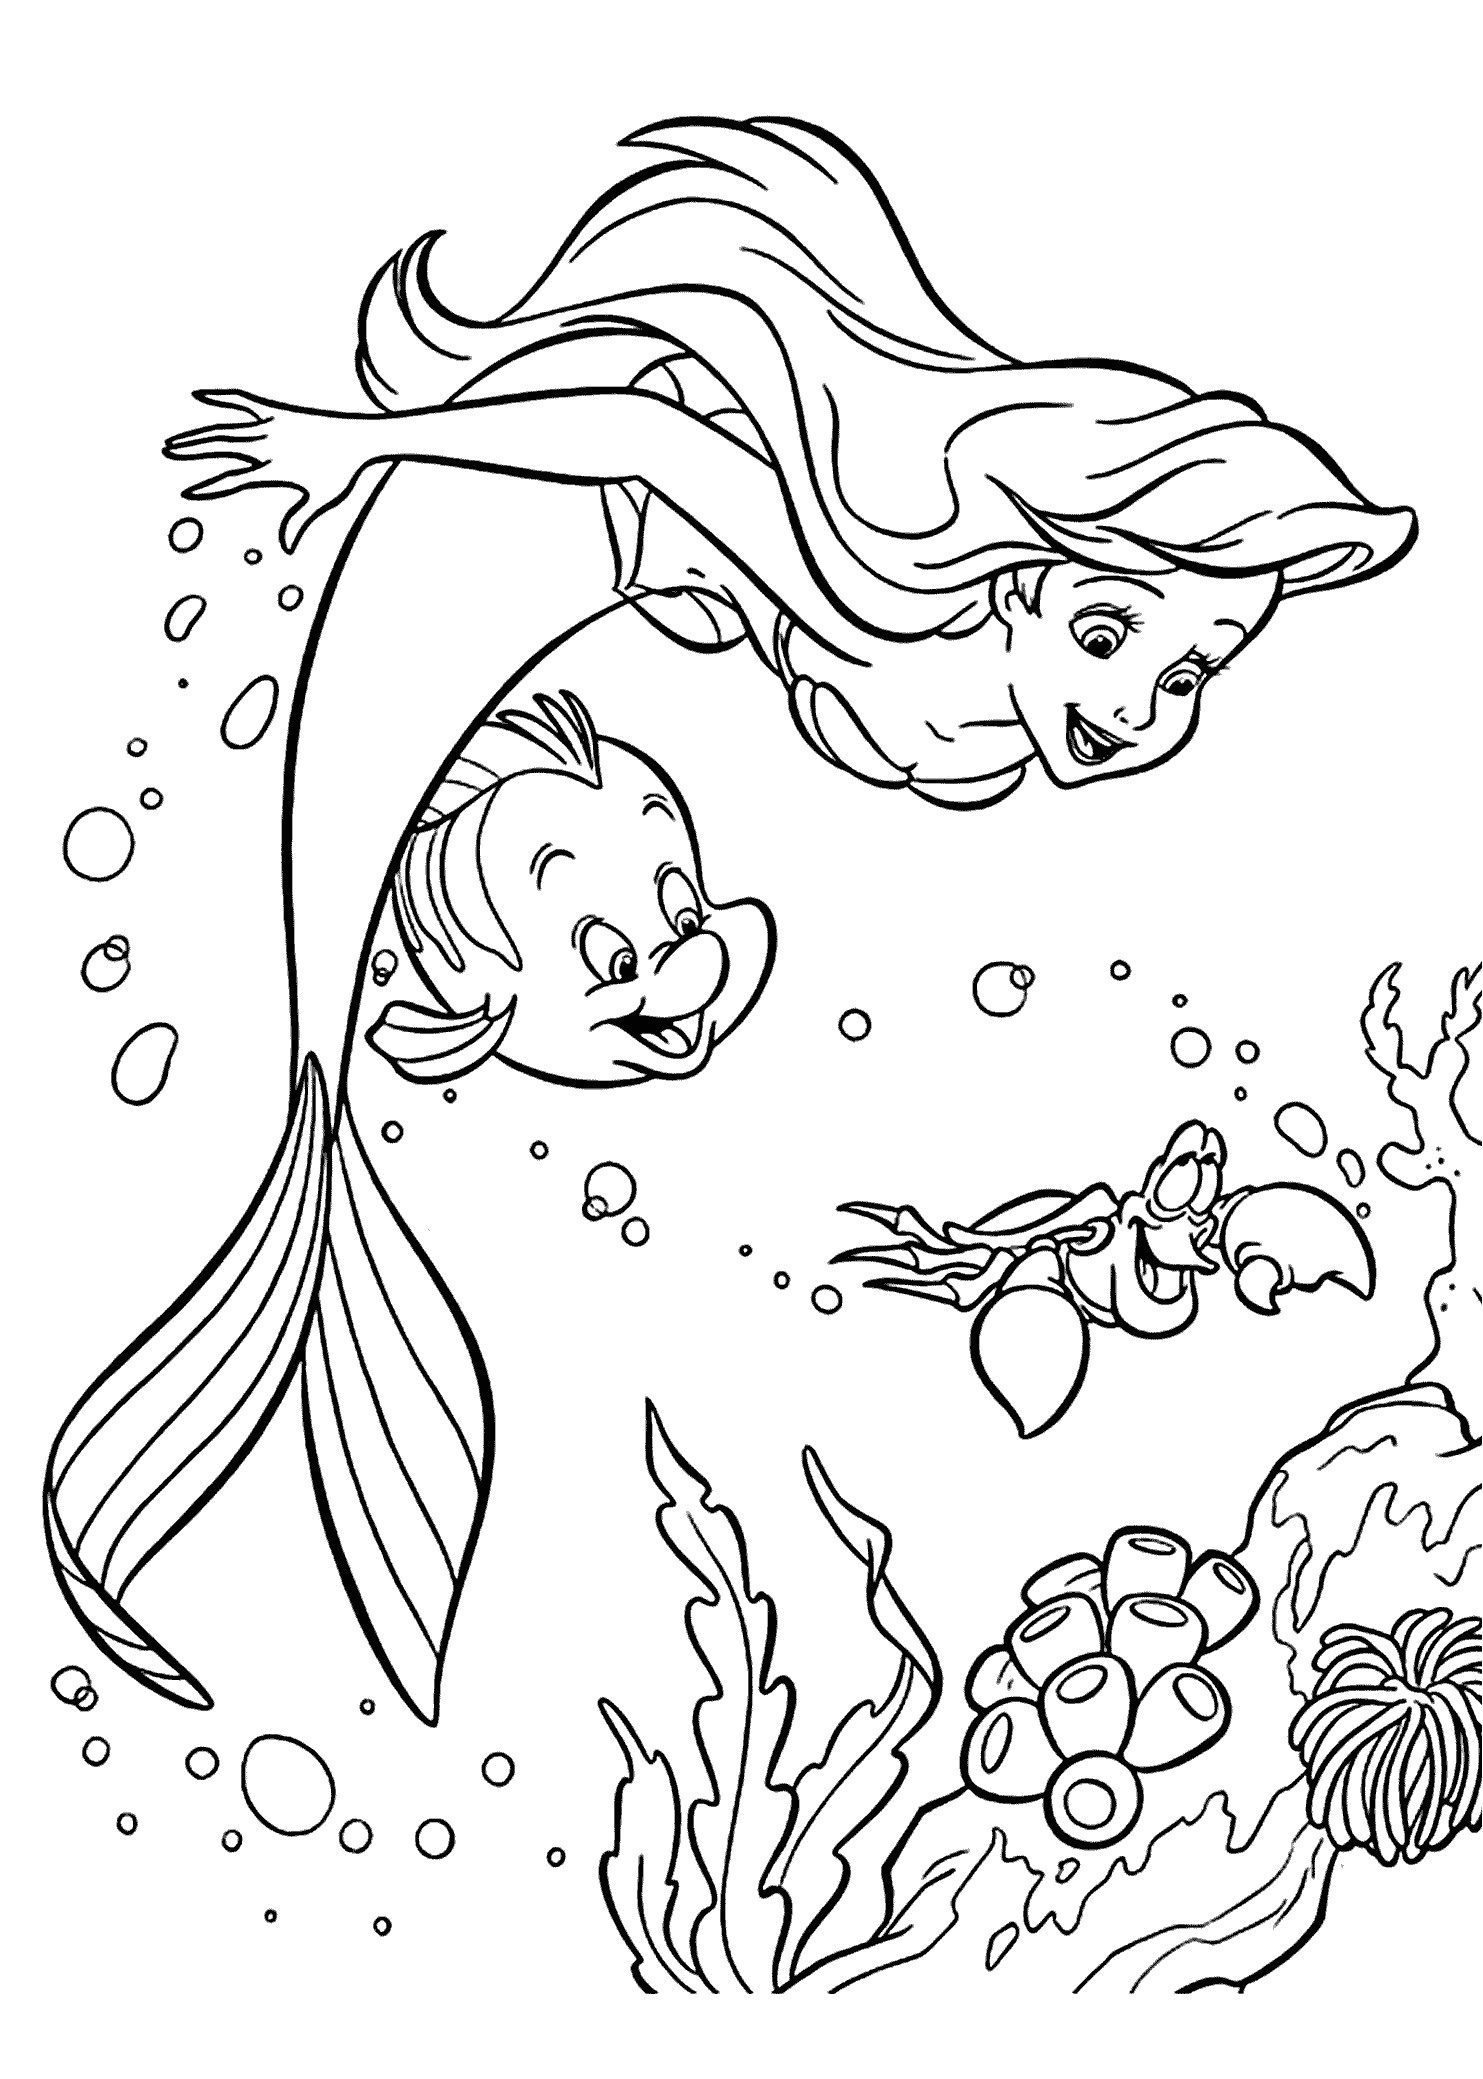 Coloring Pages Disney Little Mermaid Best Princess Ariel Coloring Page the Little Mermaid Ariel and